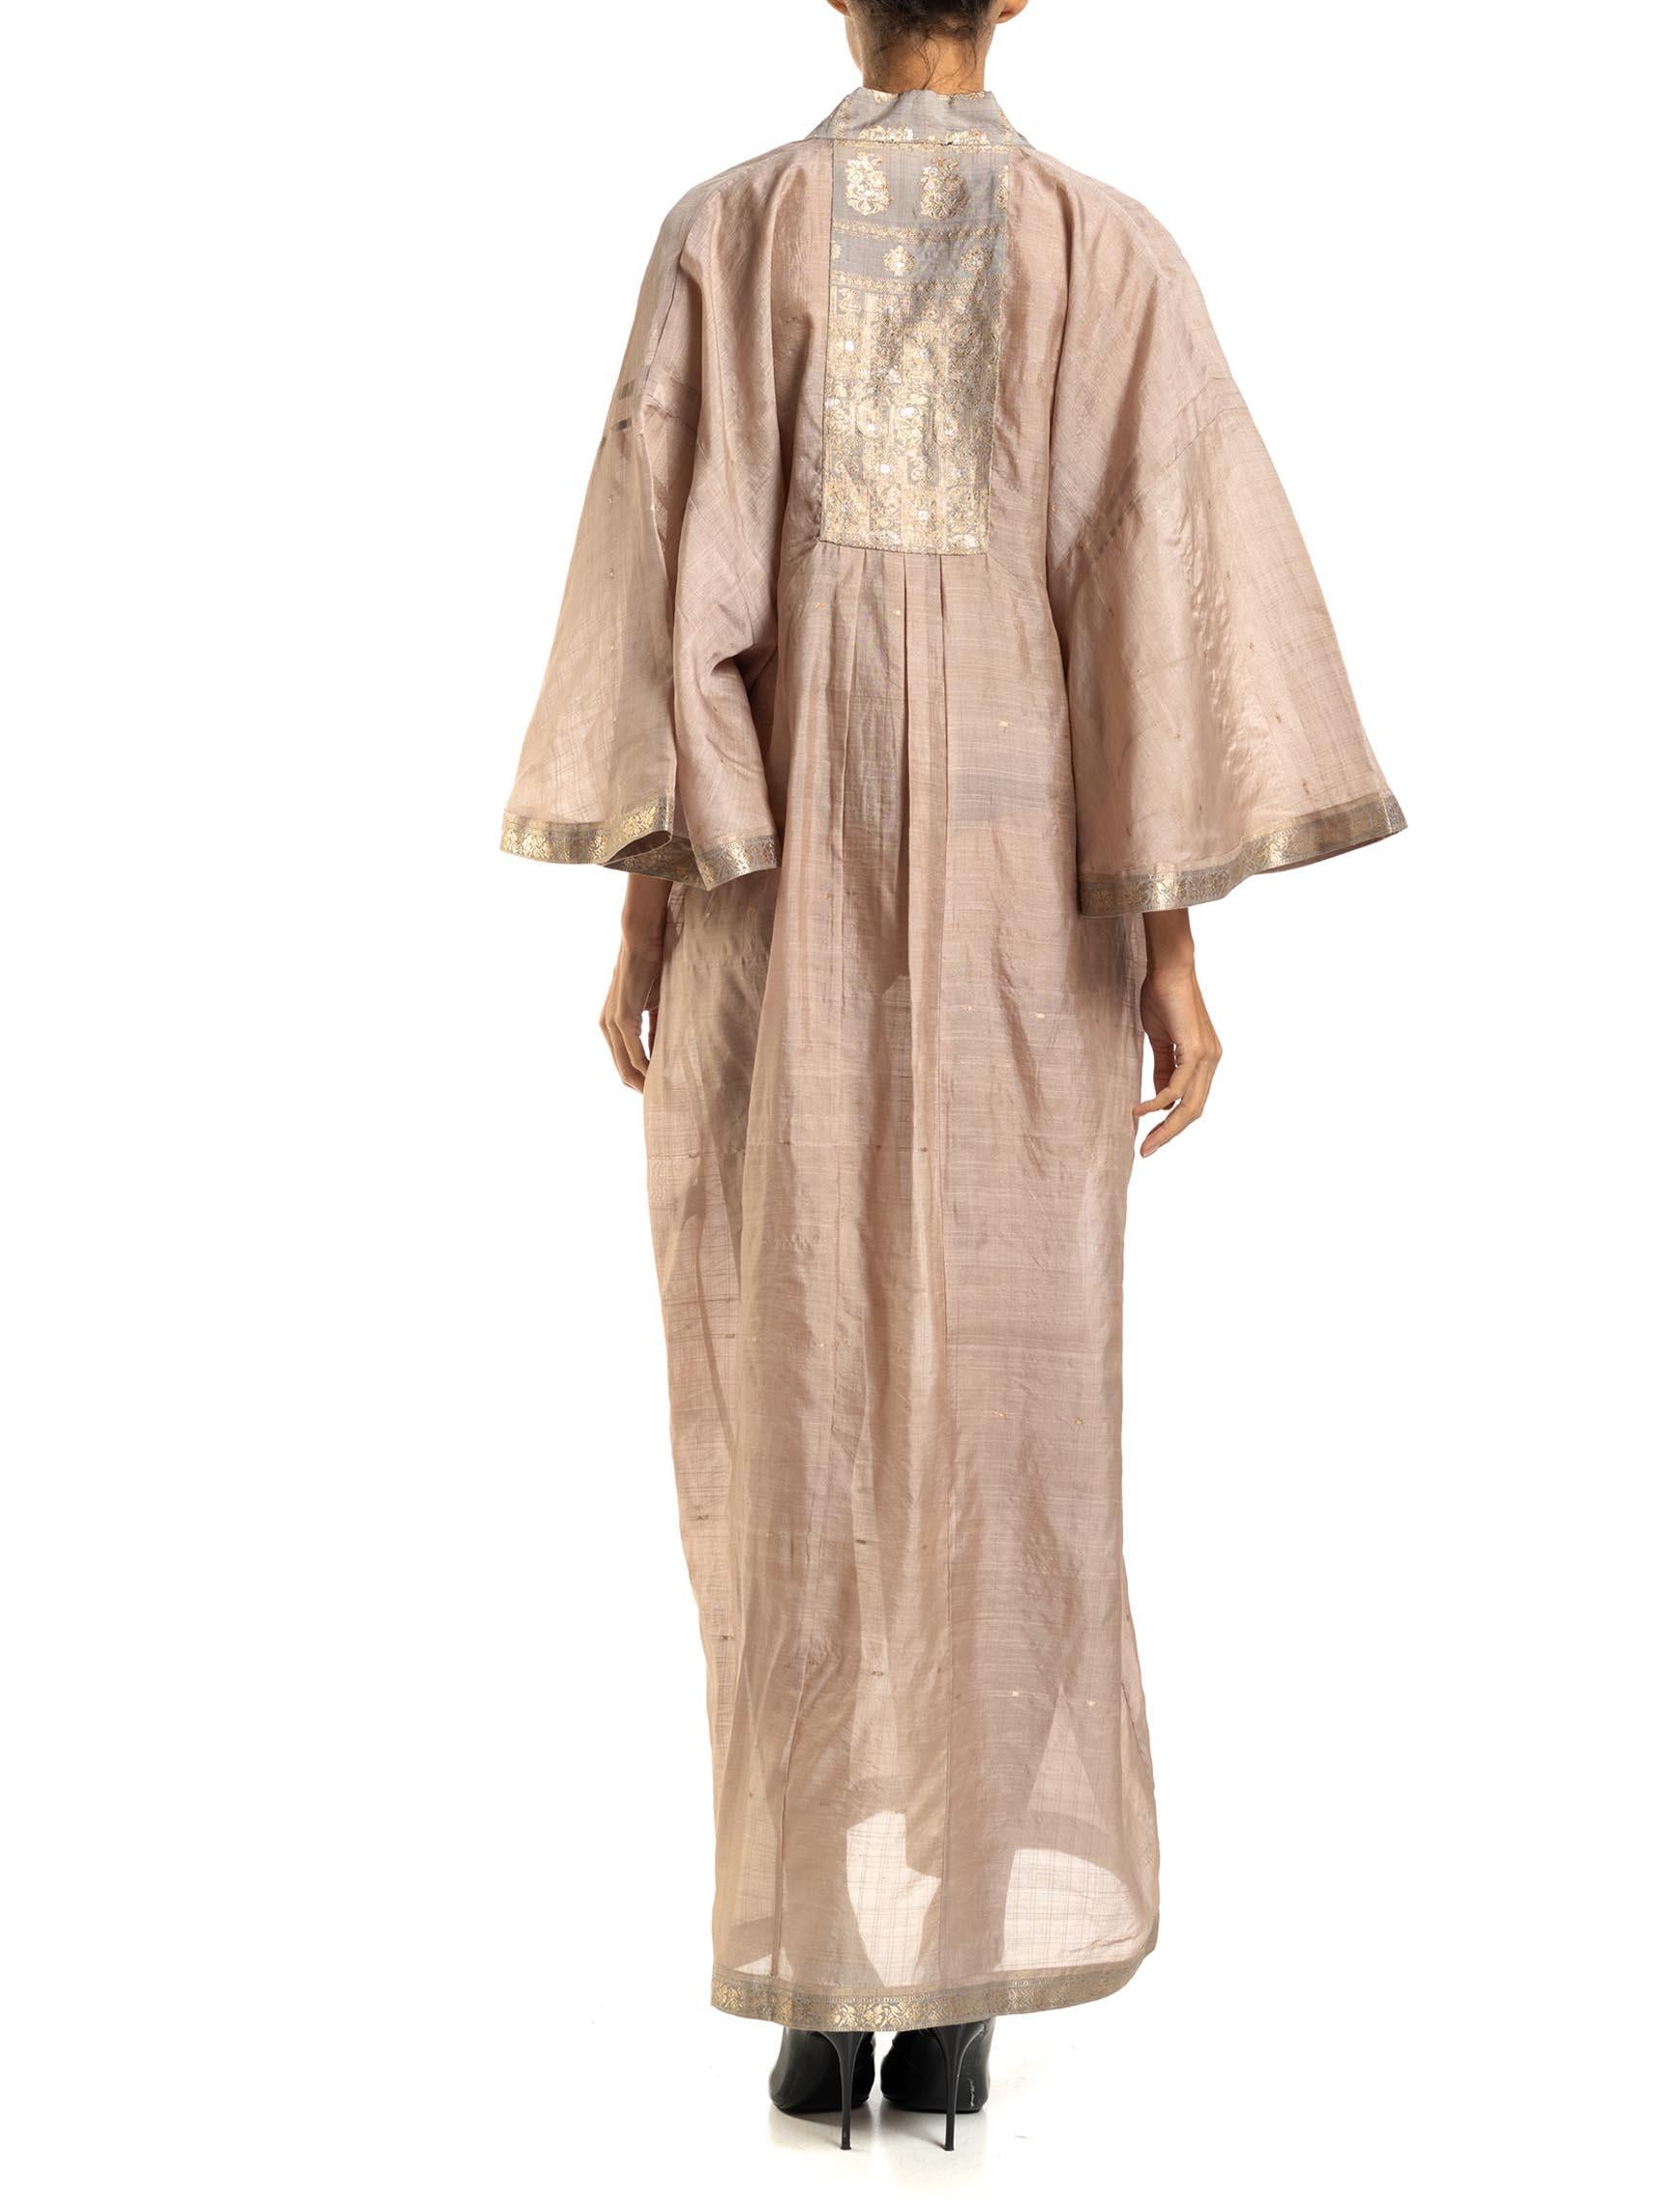 MORPHEW COLLECTION Dusty Pink Silk Kaftan Made From Vintage Sari For Sale 6